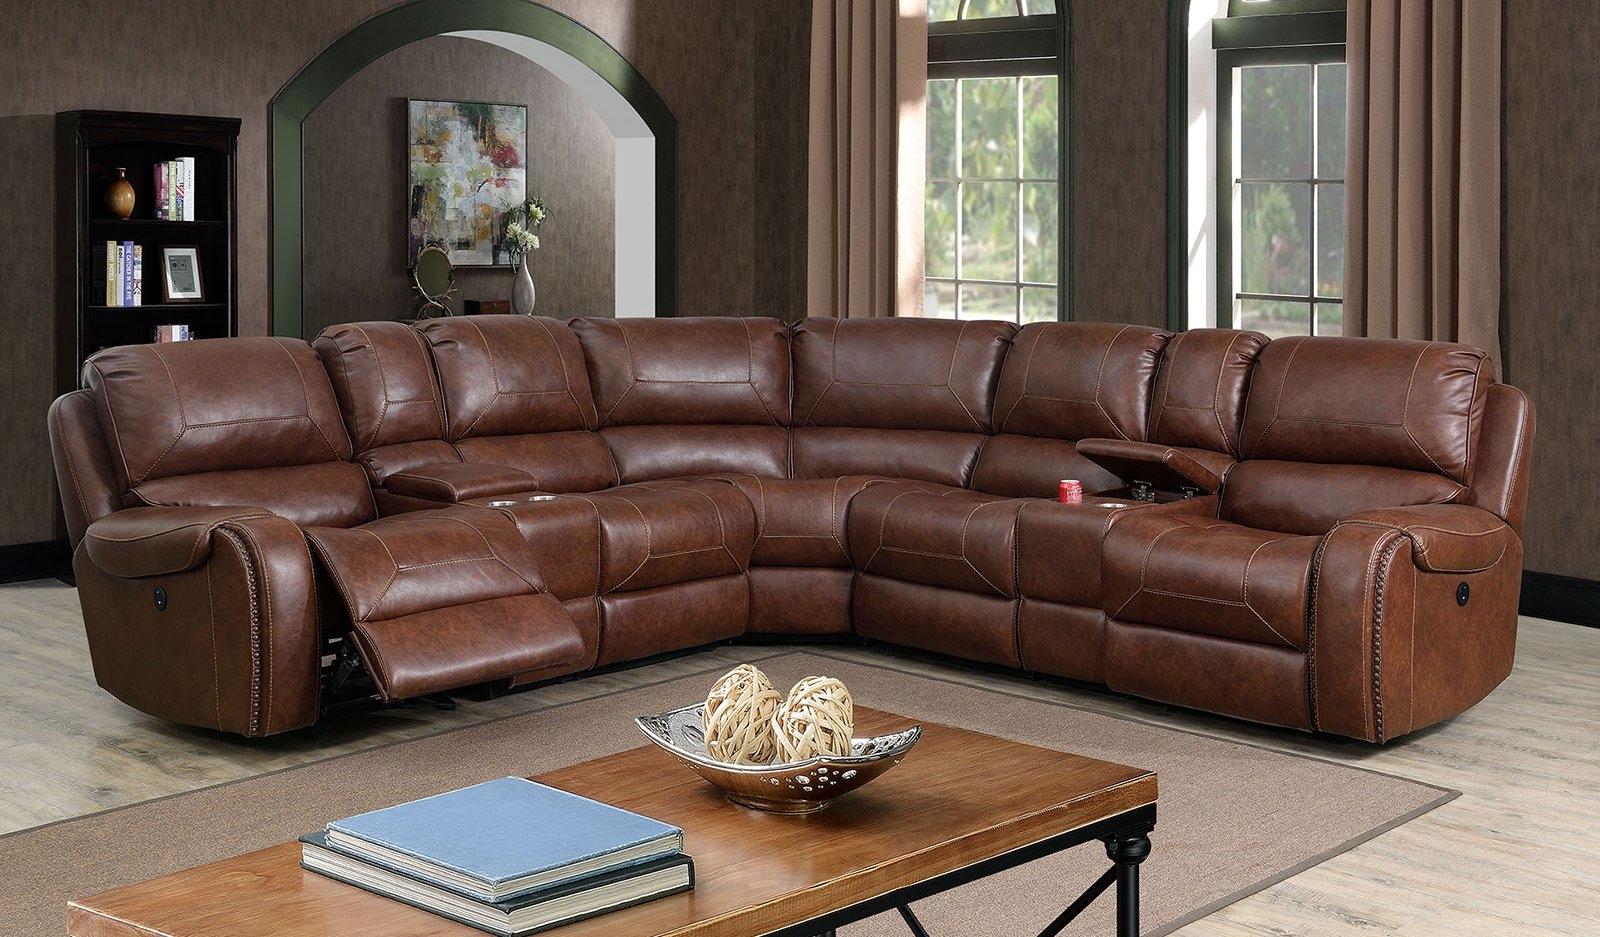 Transitional Recliner Sectional CM6951BR-SECT Joanne CM6951BR-SECT in Brown Leatherette